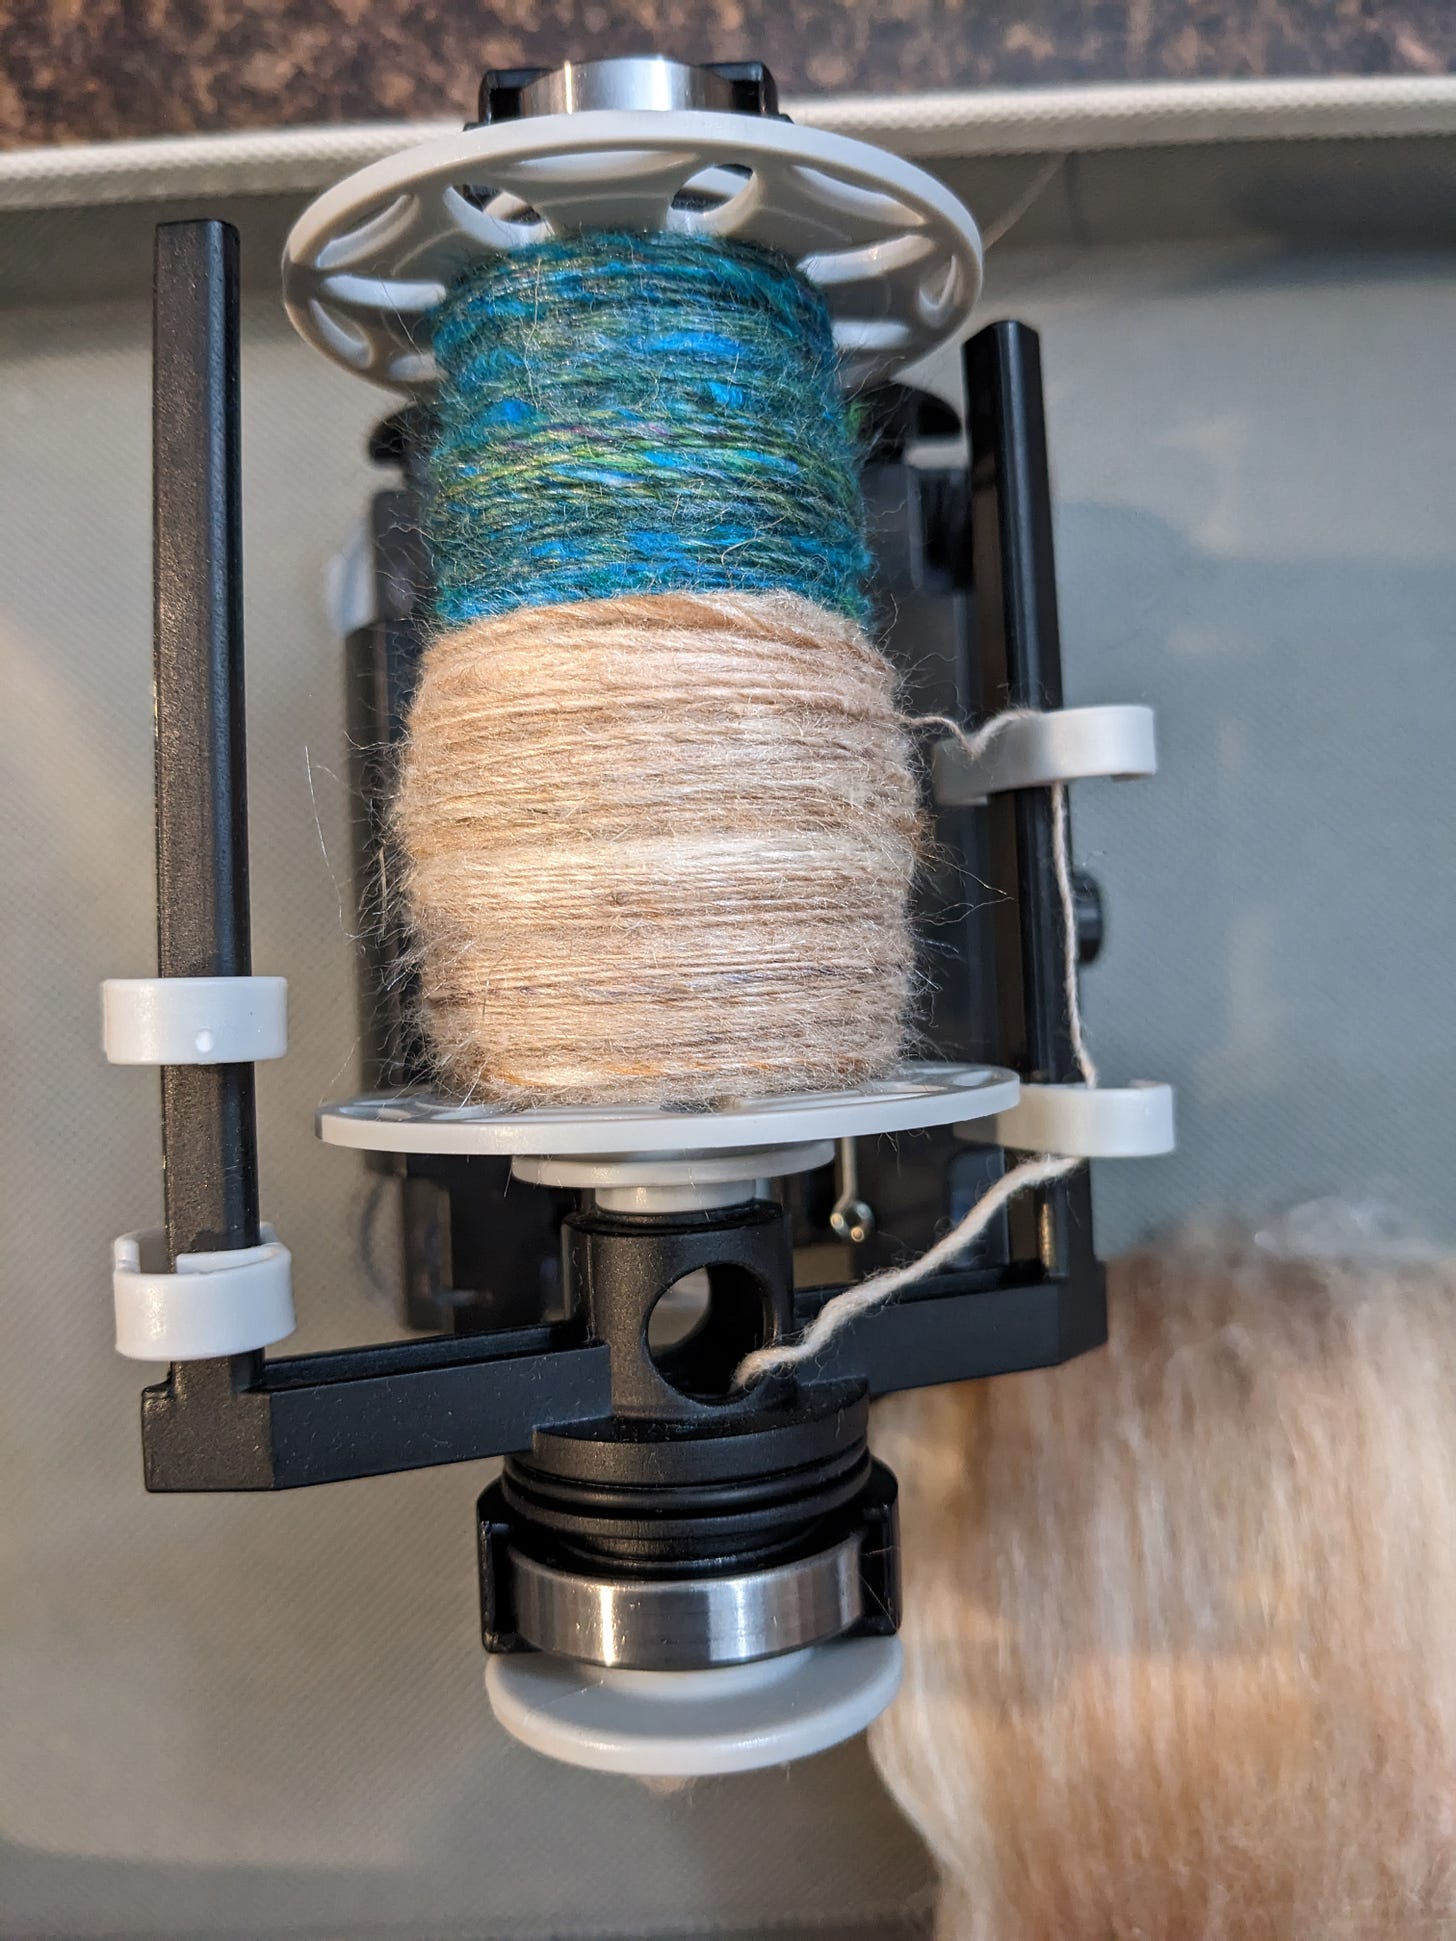 A gray and black electric spinning wheel with two kinds of yarn on the bobbin: one blues and greens and one a light fawn color.